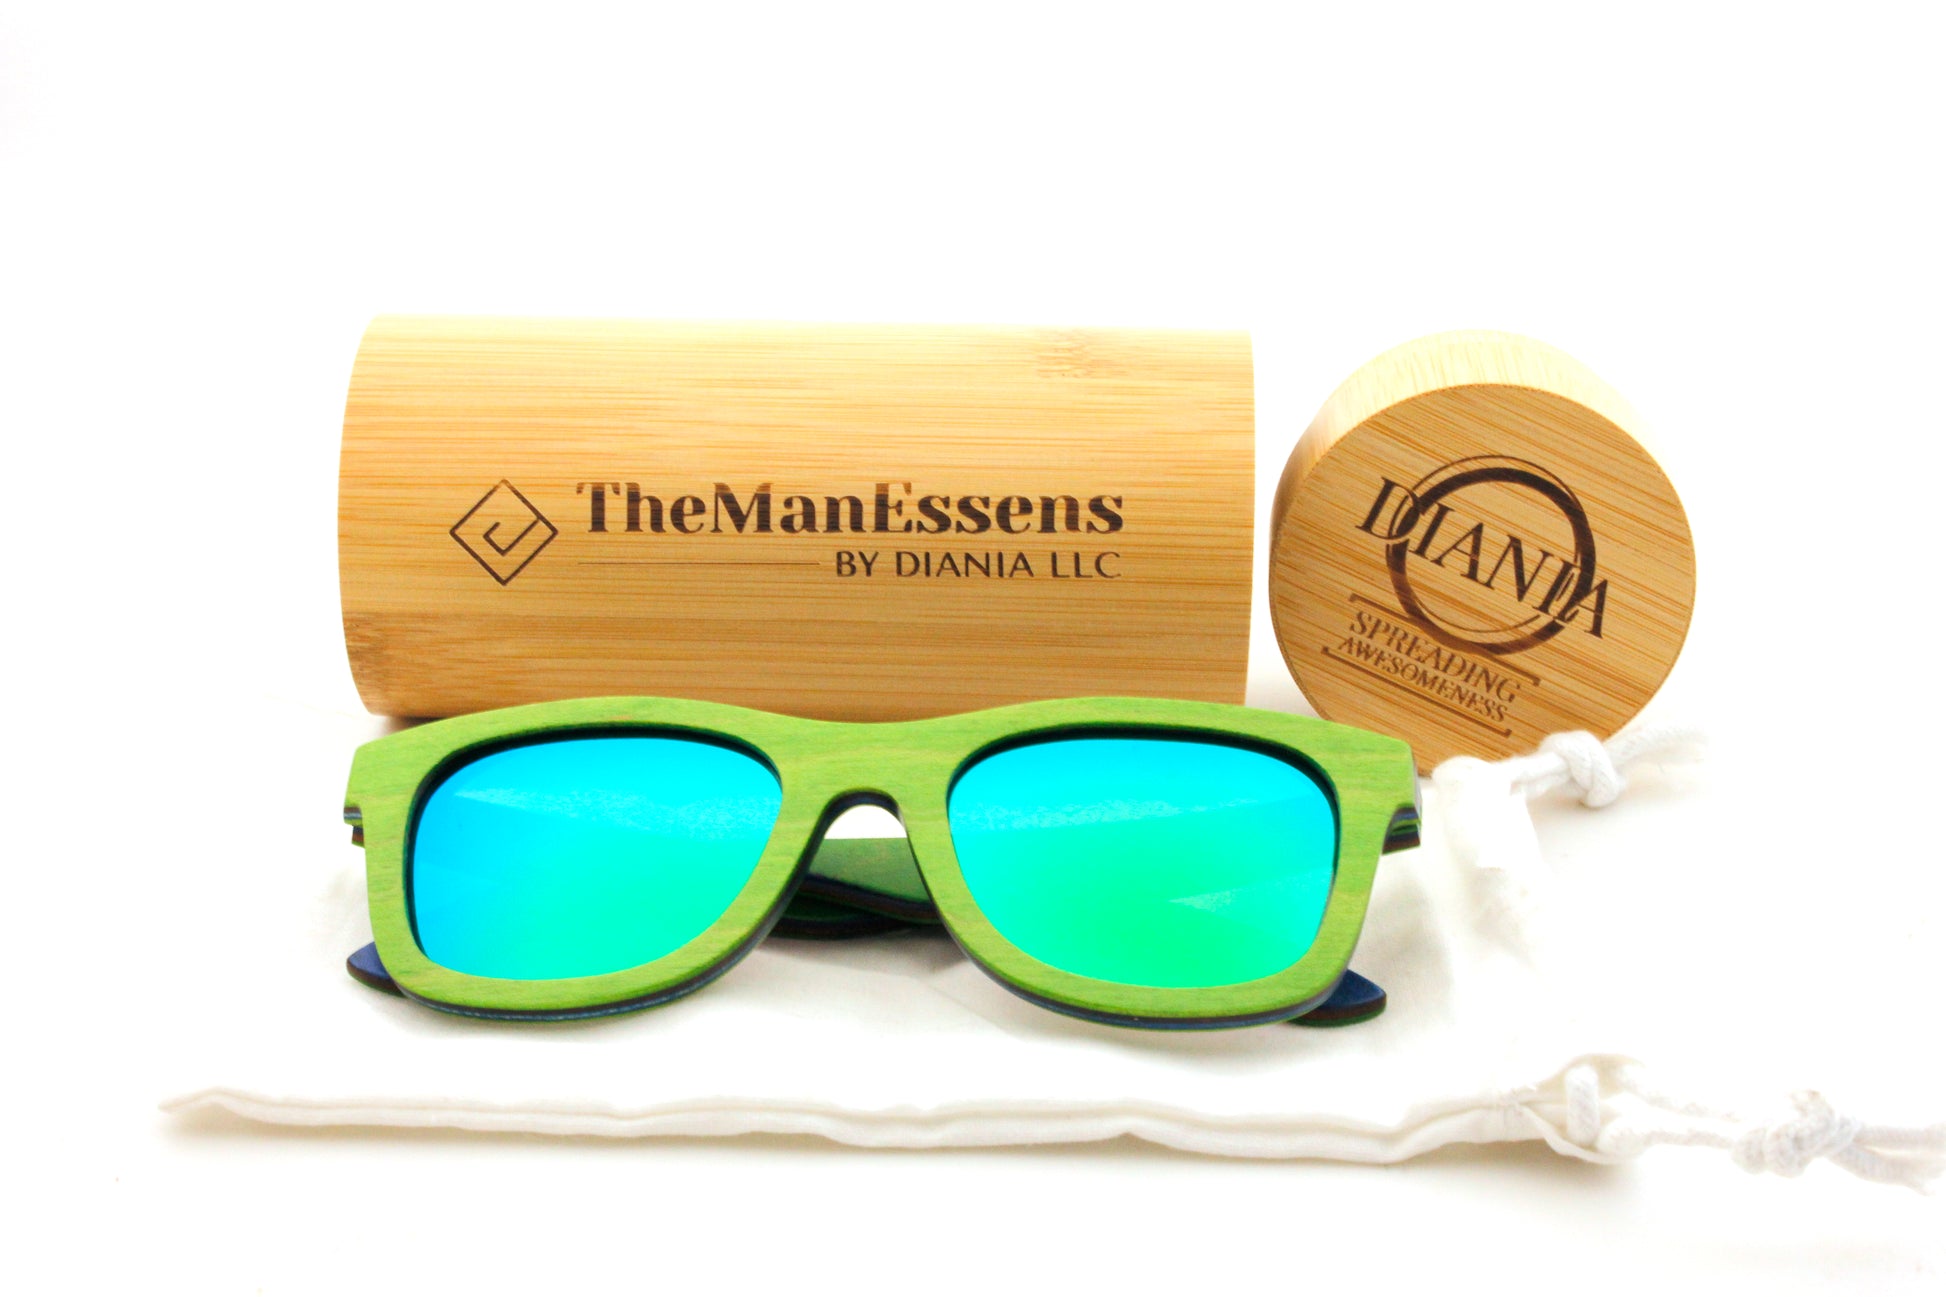 Quarter bamboo wood sunglasses on cotton bag in front of bamboo tube case